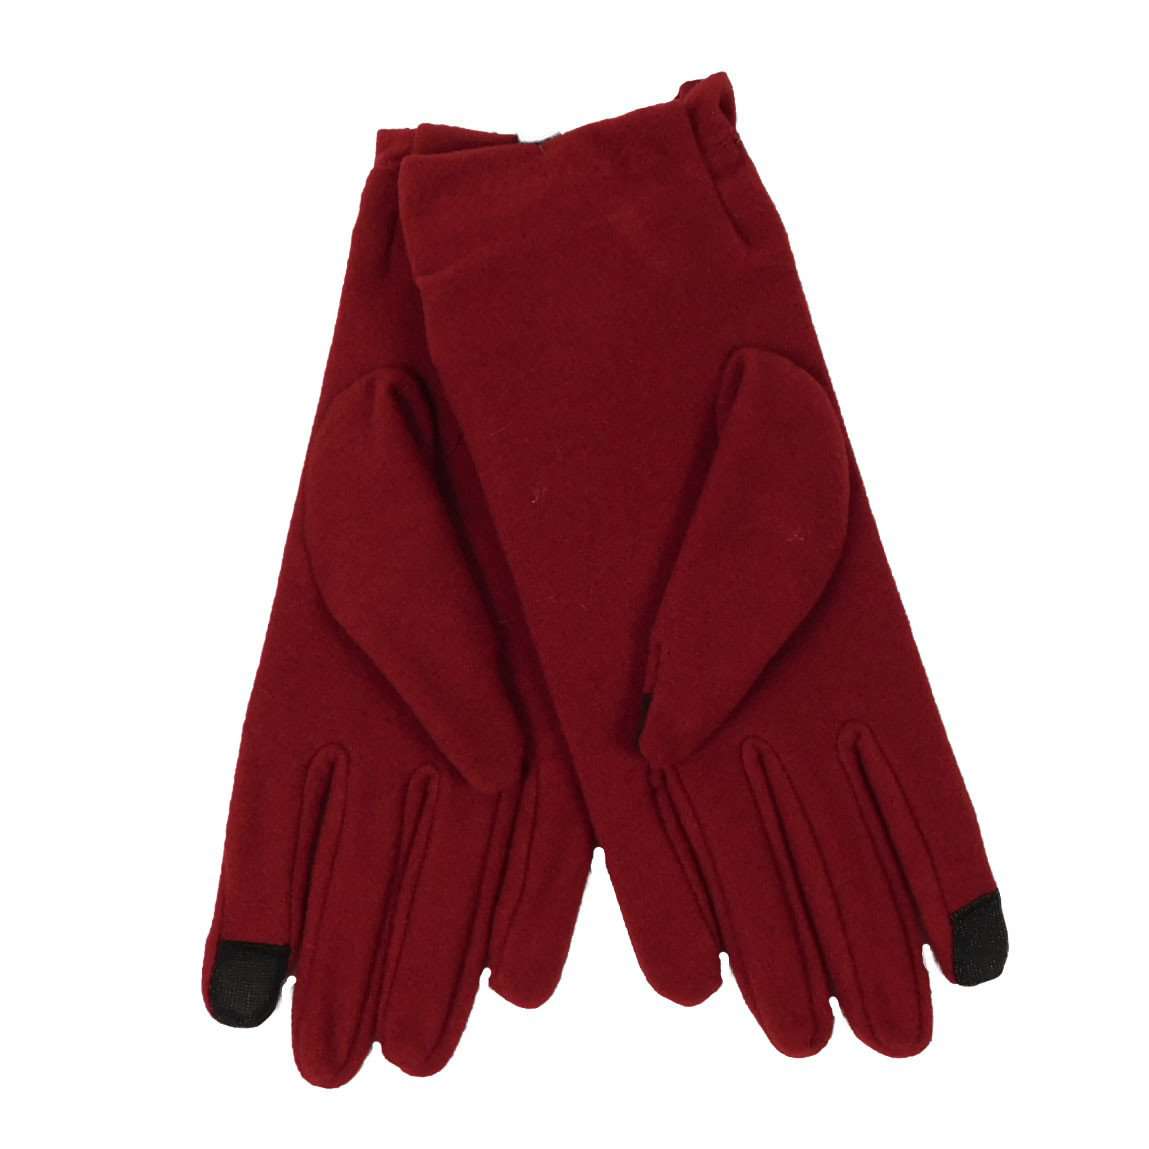 Texting Glove with Ruffles, Gloves - SetarTrading Hats 